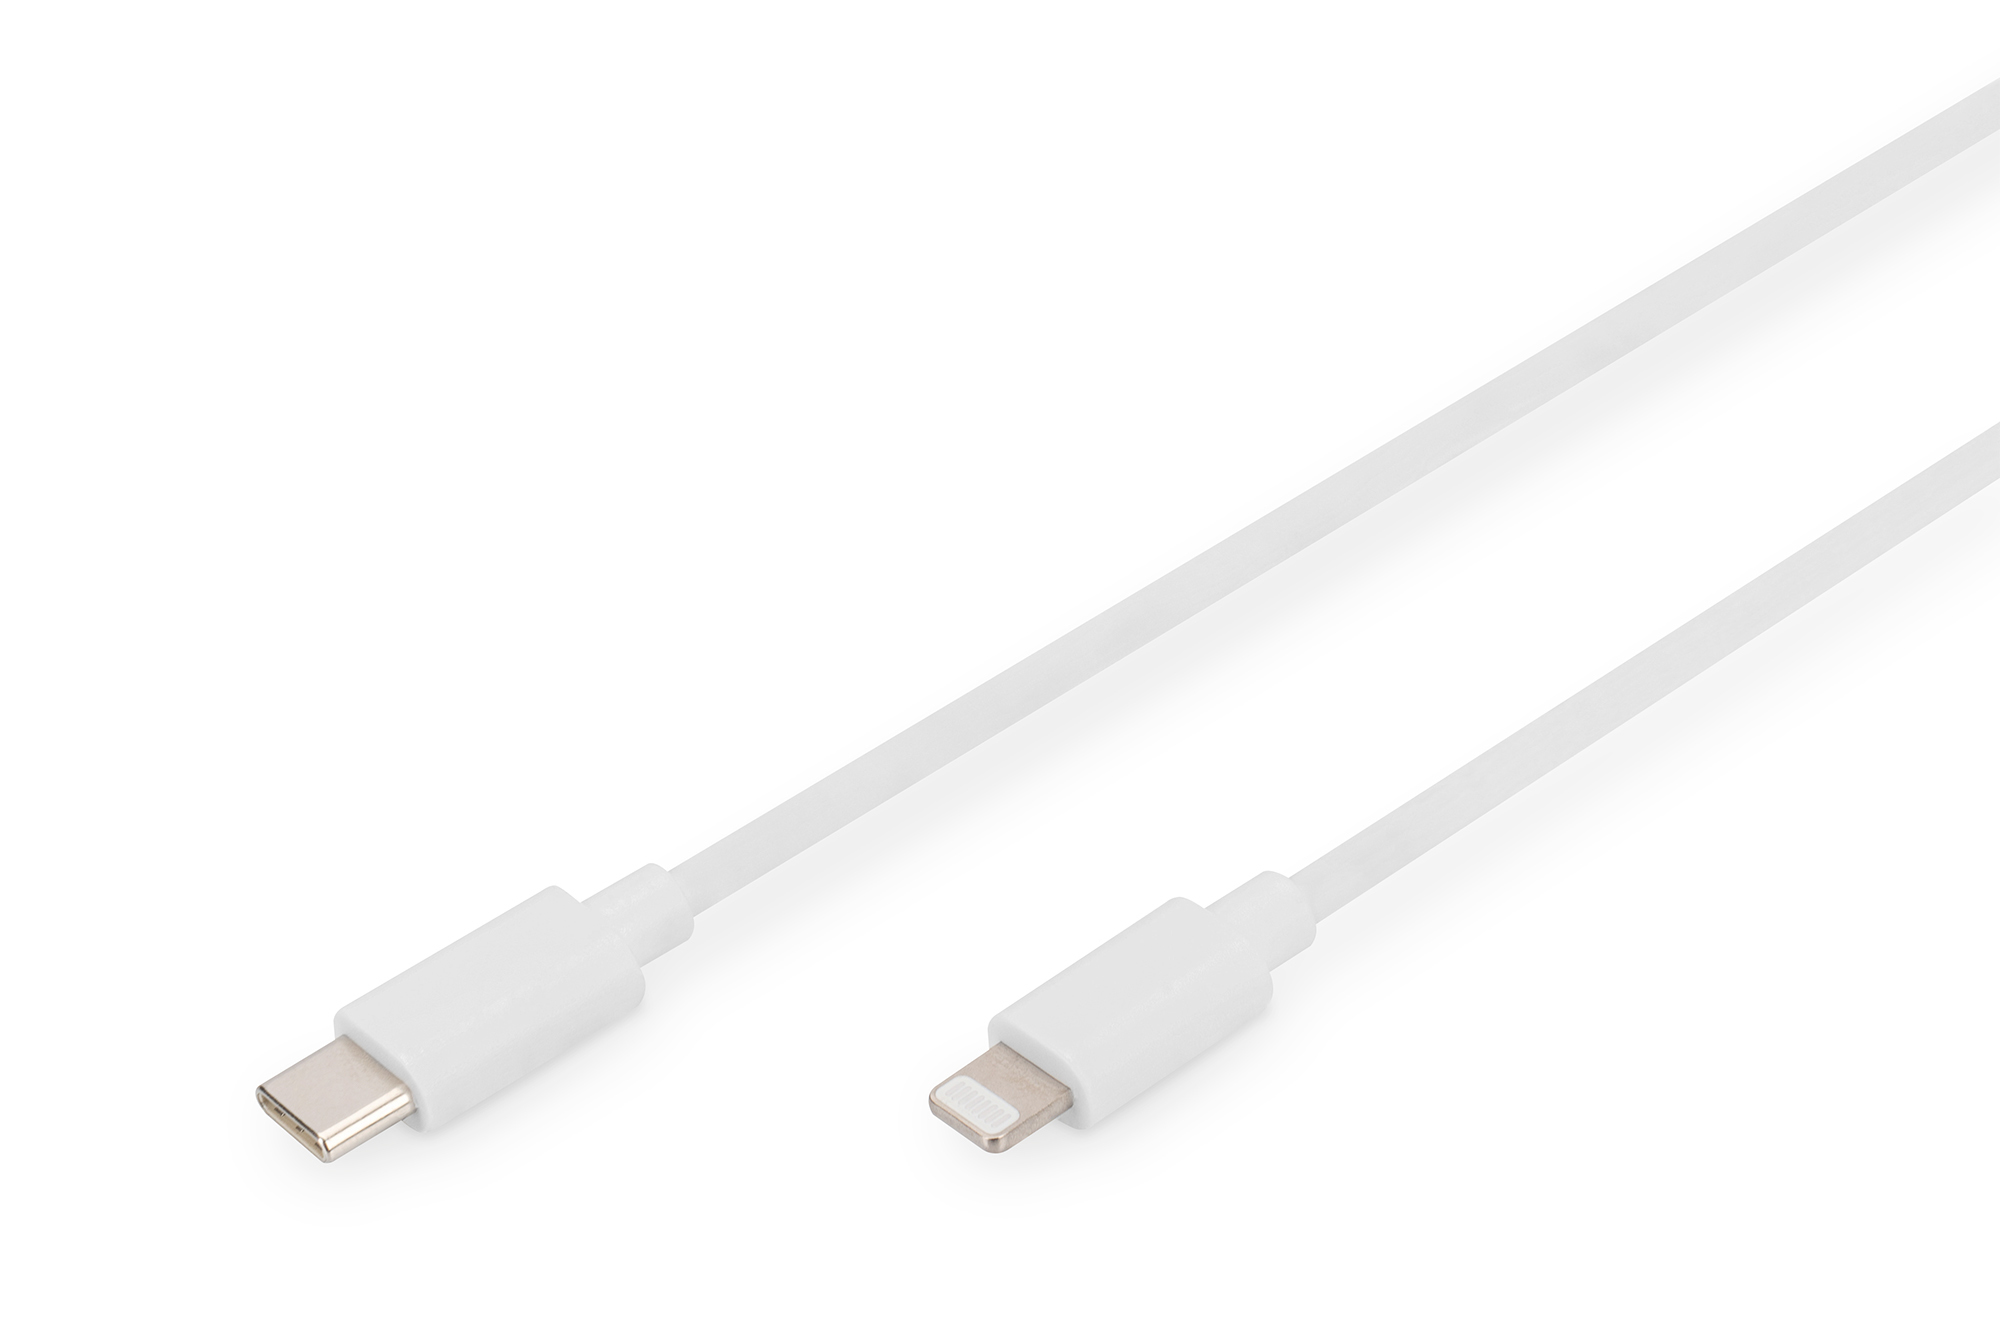 Photos - Cable (video, audio, USB) Digitus Lightning to USB-C data/charging cable, MFI-certified DB-600109-02 